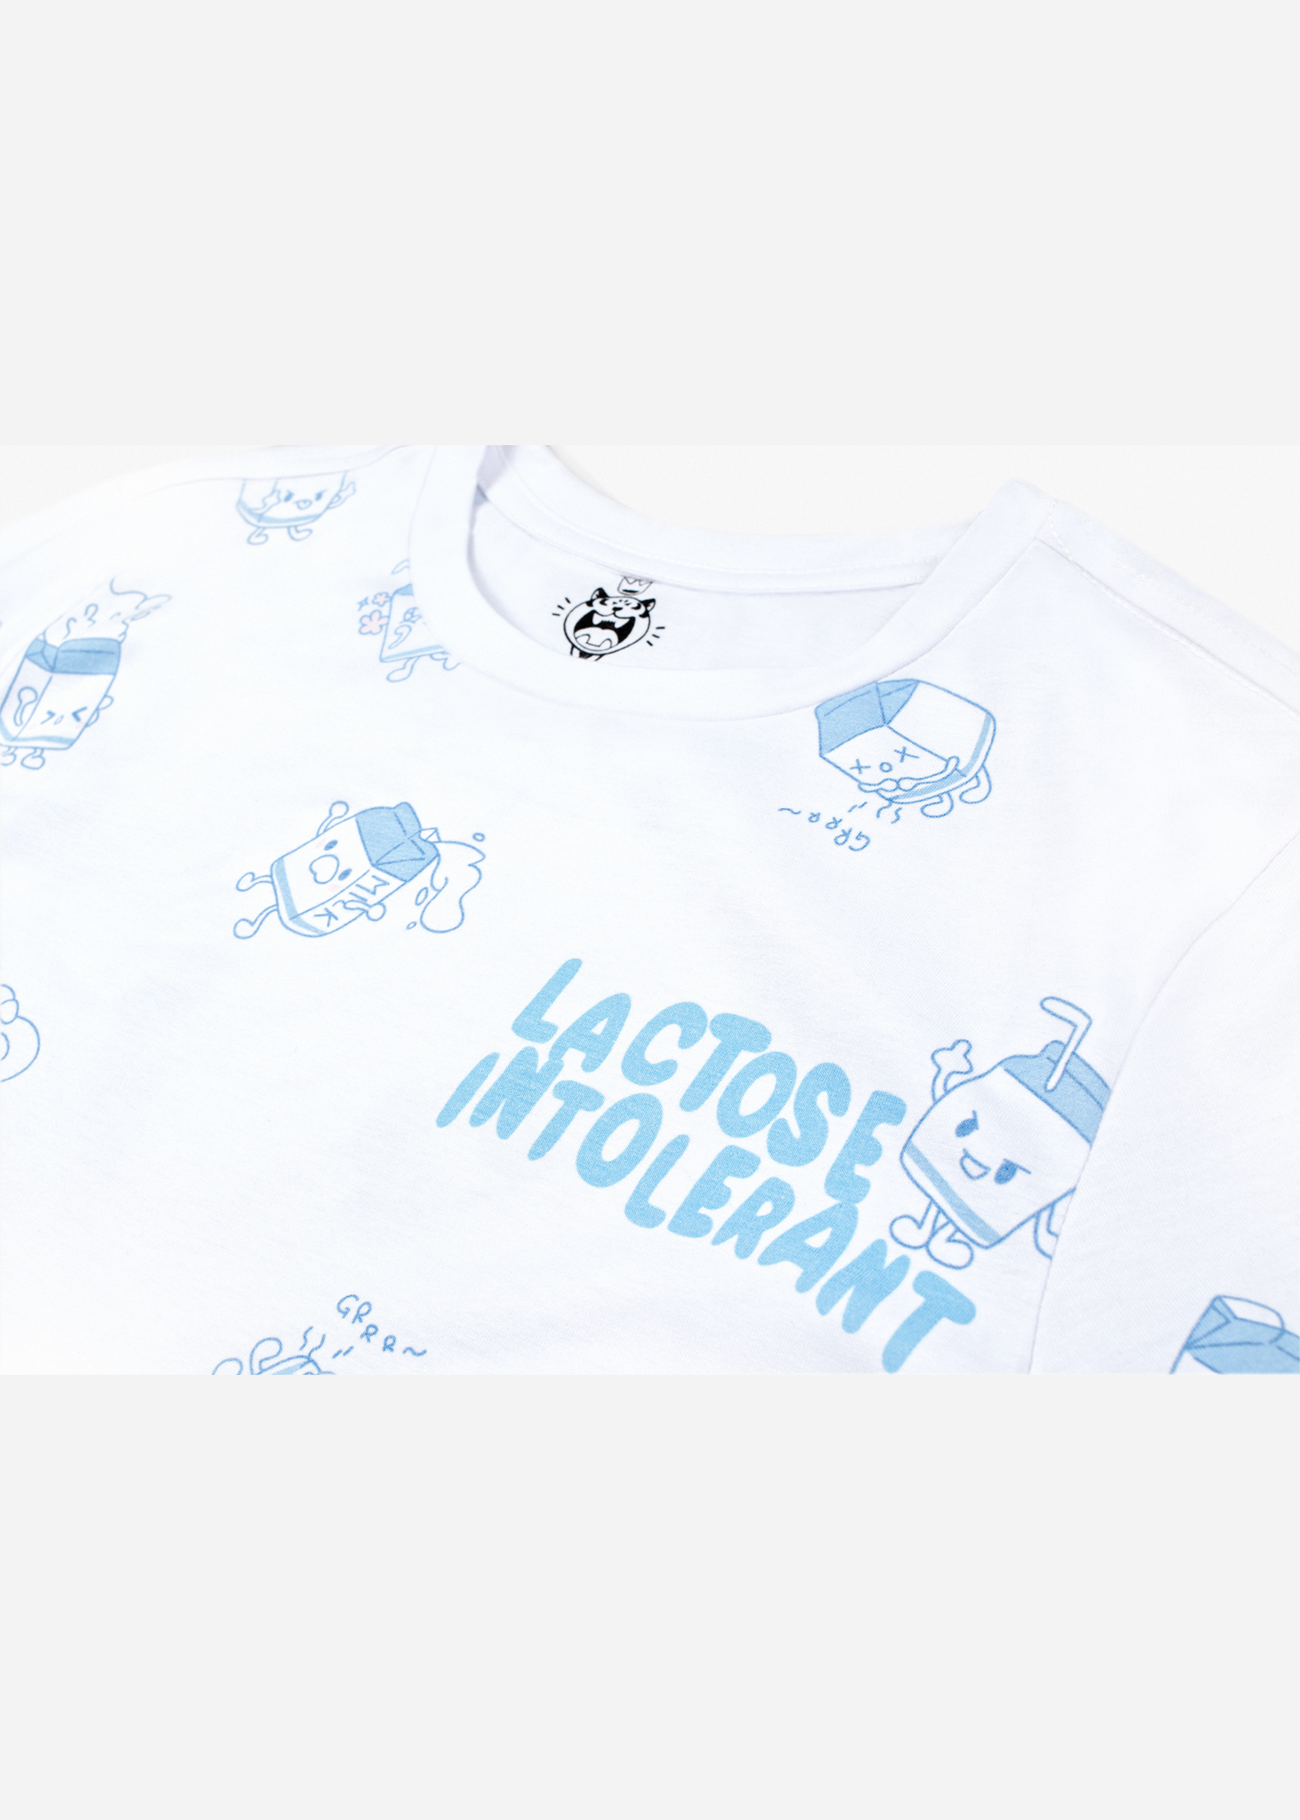 An anime tshirt featuring small lactose intolerant themed characters getting up to mischief! Anime clothing, anime shirts, and more. High quality cotton clothes.